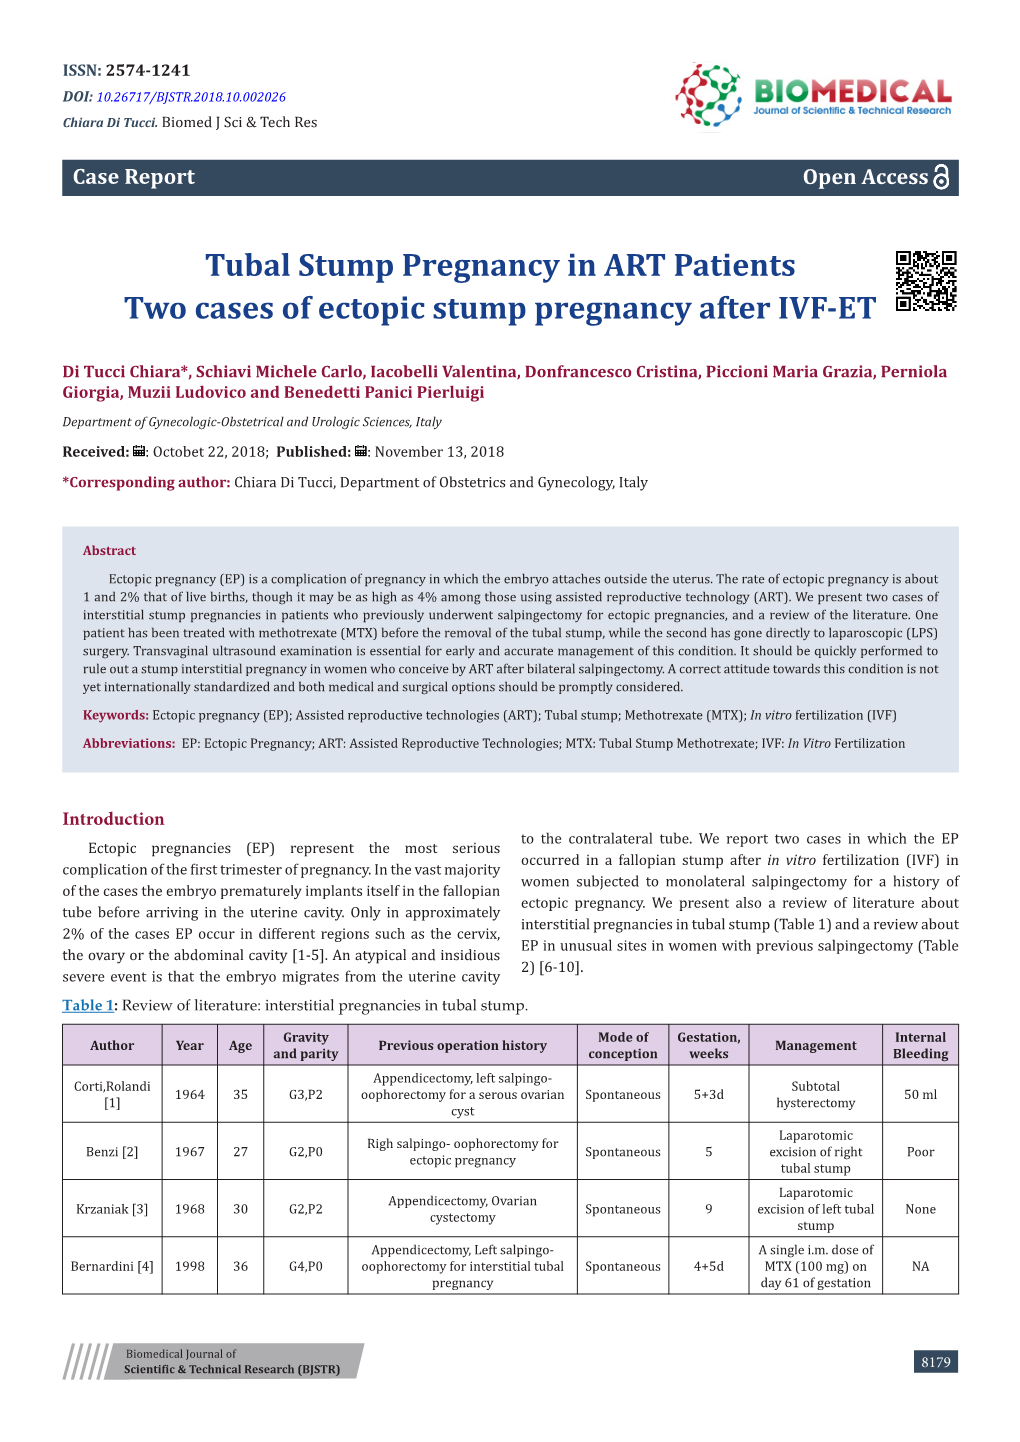 Tubal Stump Pregnancy in ART Patients Two Cases of Ectopic Stump Pregnancy After IVF-ET